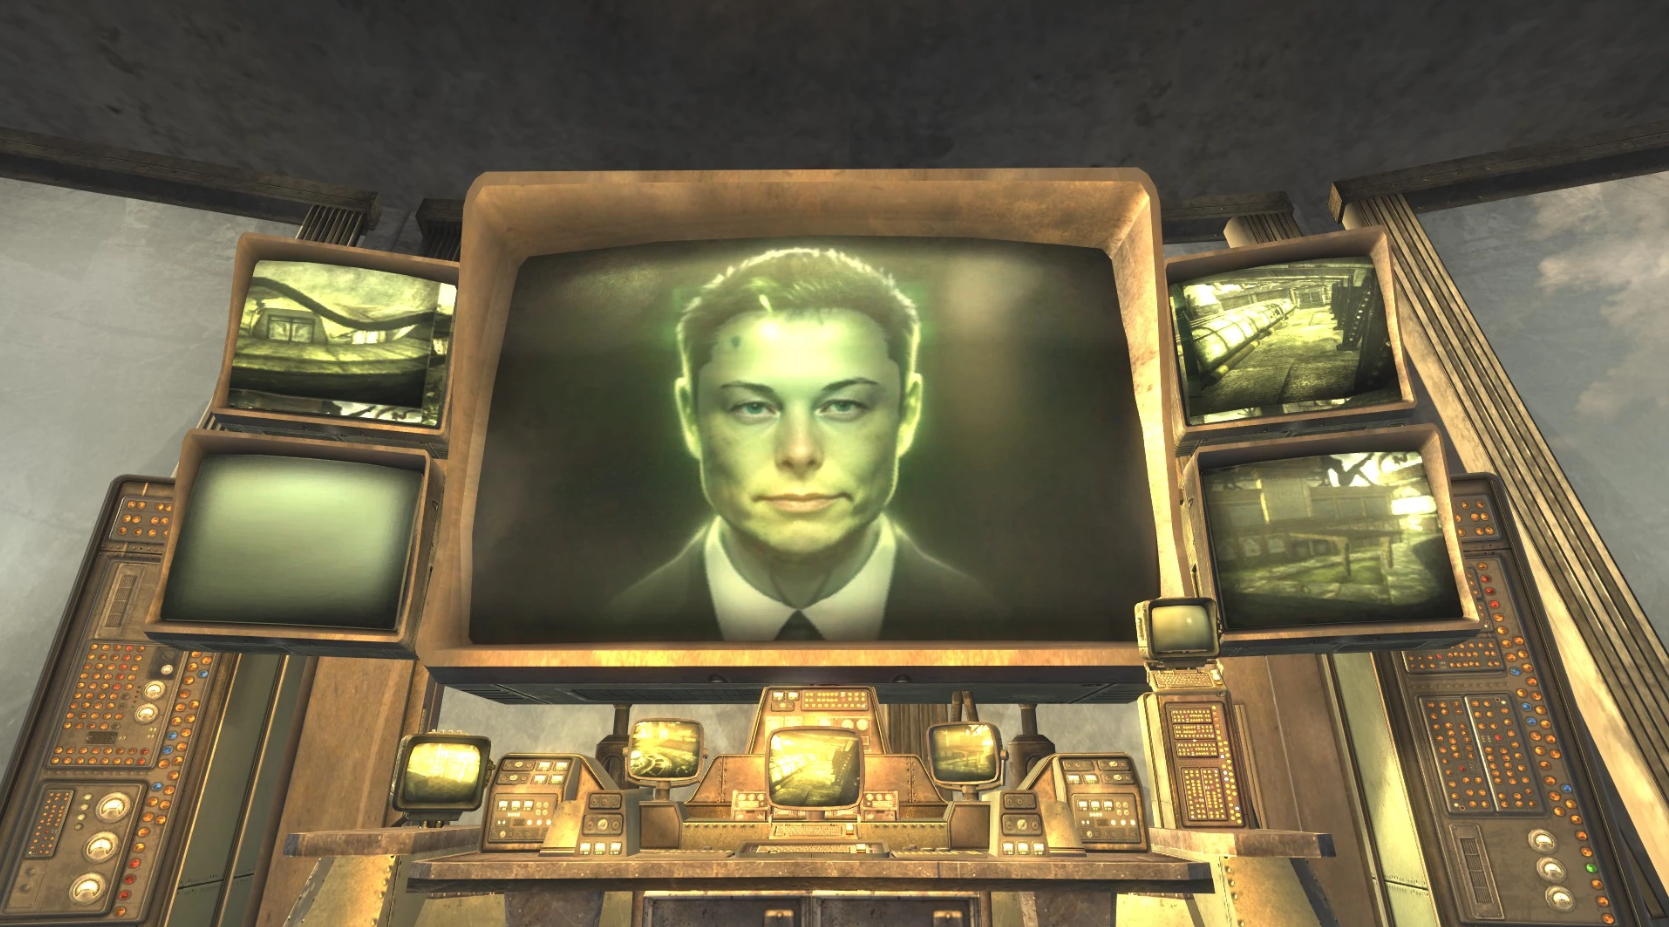 Fallout: New Vegas mod replaces techbro antagonist with an AI